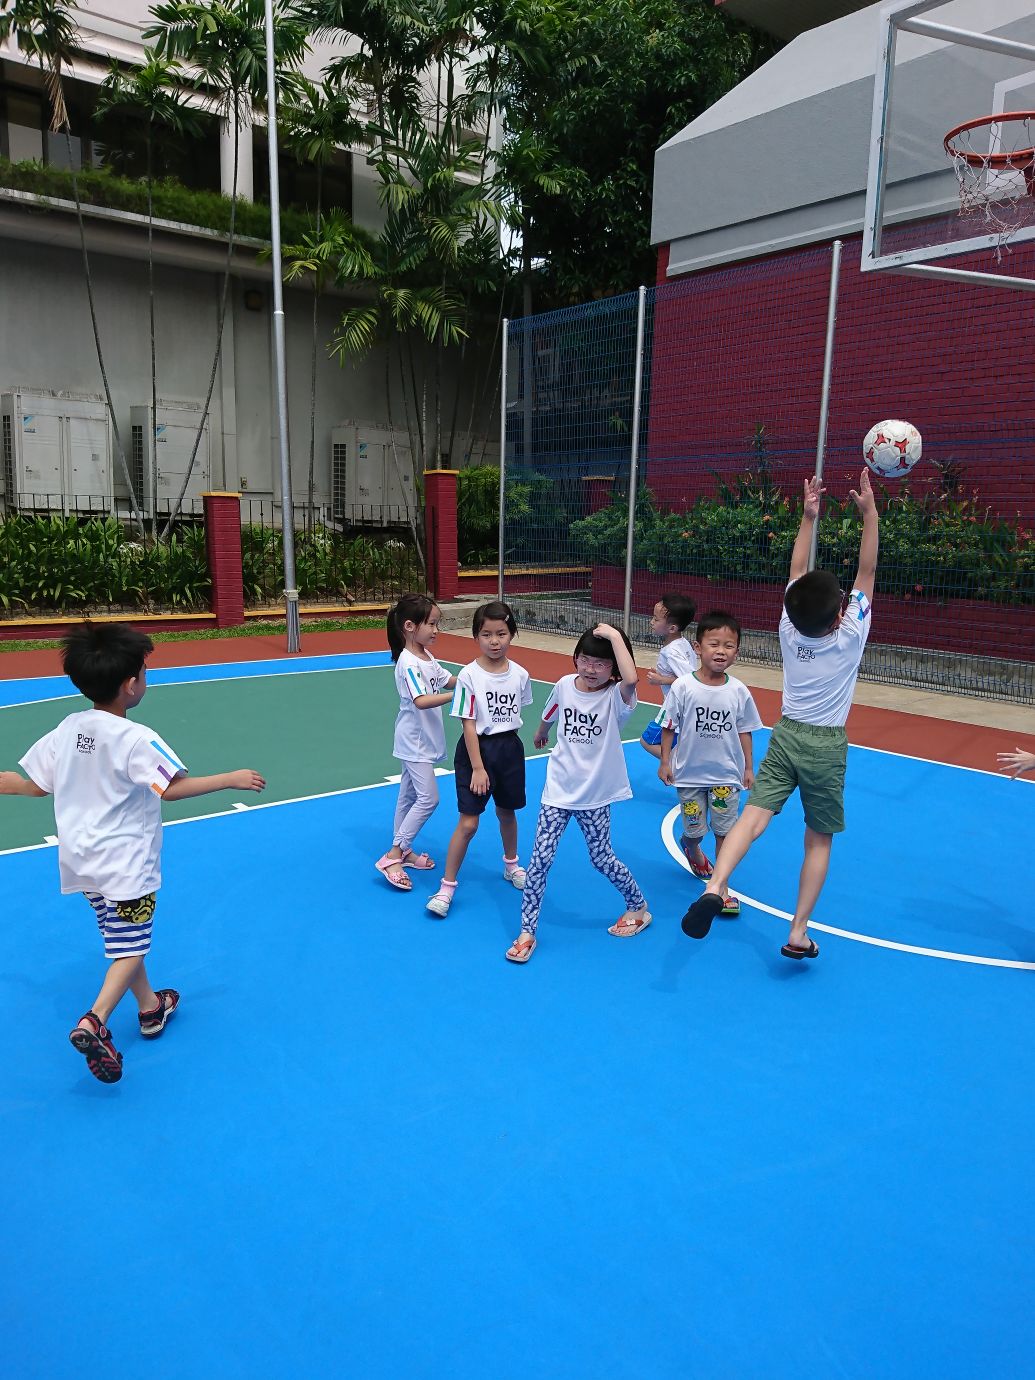 rosyth school, nan hua, east spring, pei chun public, hougang primary, yio chu kang primary, chij our lady of nativity, chij our lady of good counsel, toa payoh, serangoon, tampines, west coast, punggol oasis,